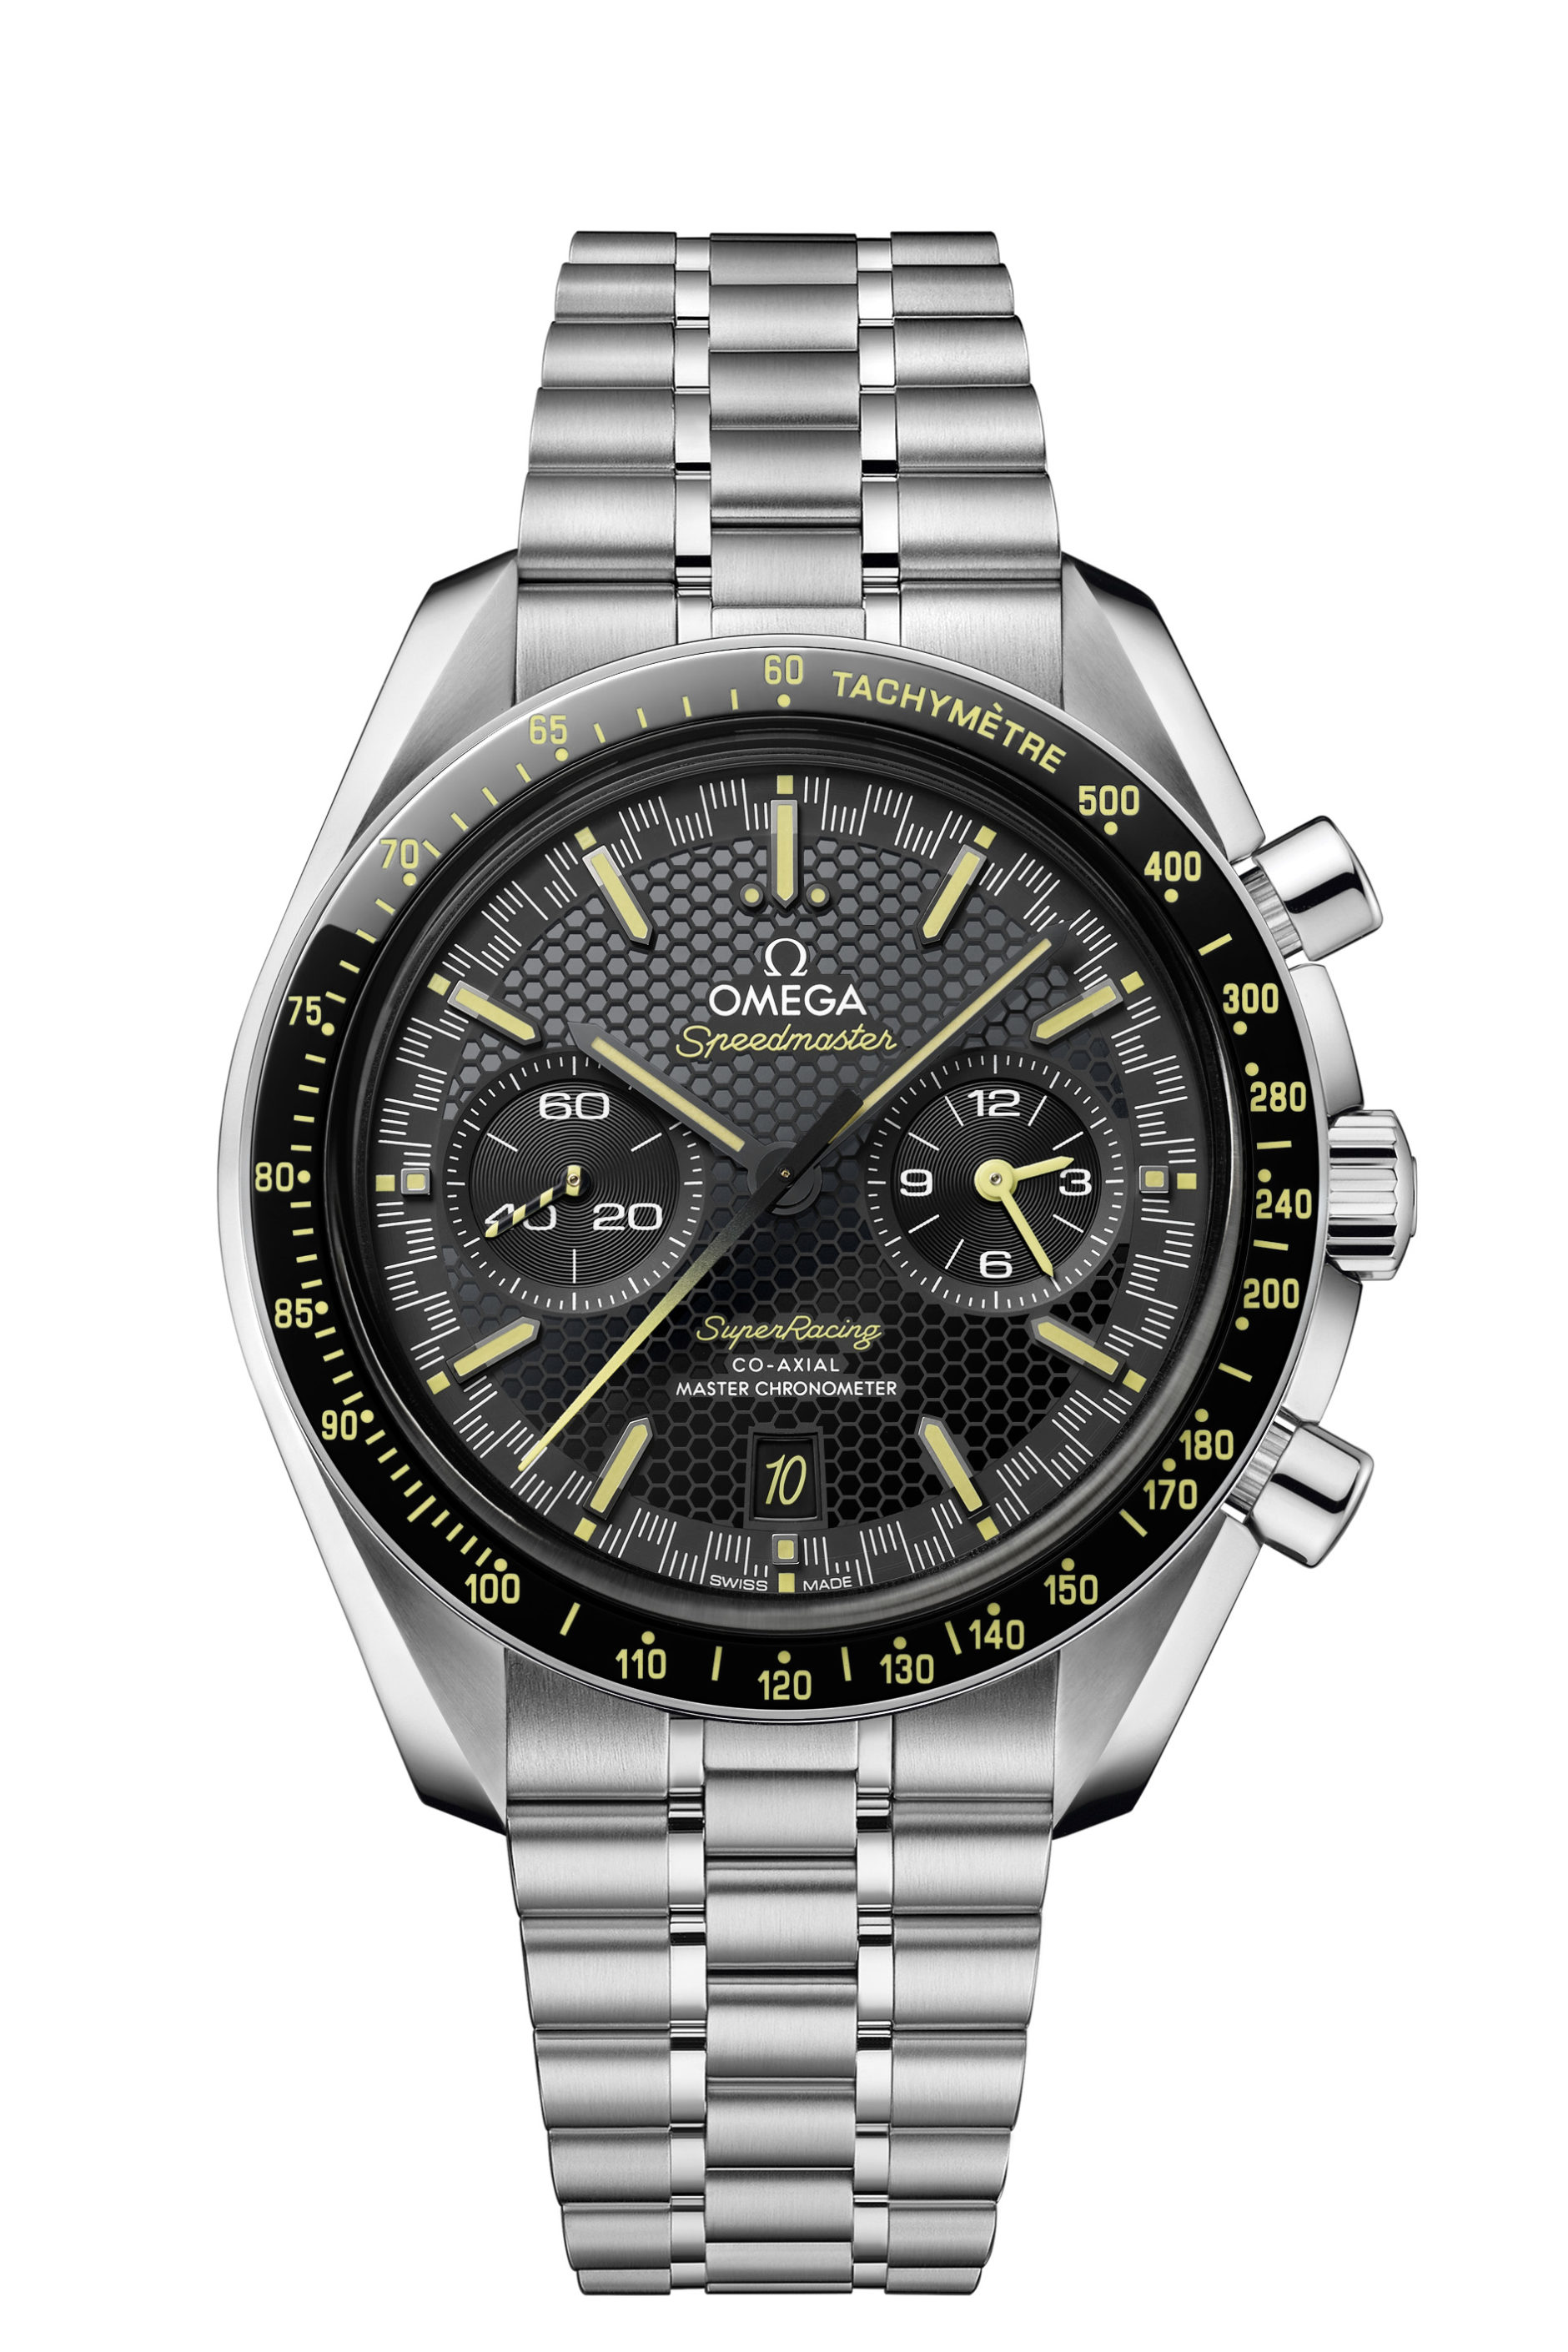 0/+2 seconds a day Omega Unveils New Speedmaster Super Racing, Ultra